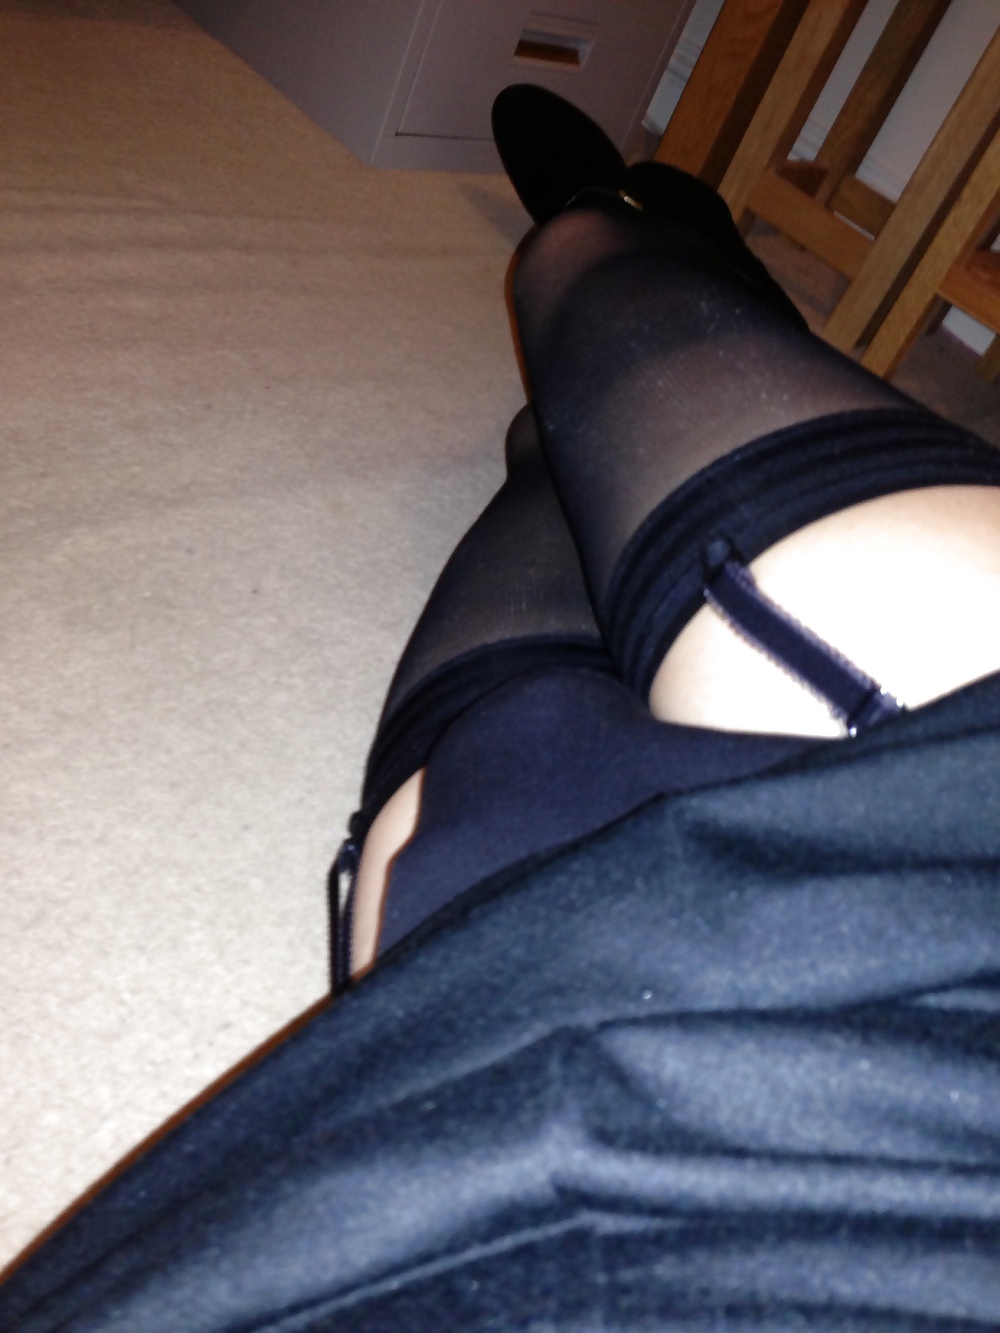 Porn image new little black dress and stockings